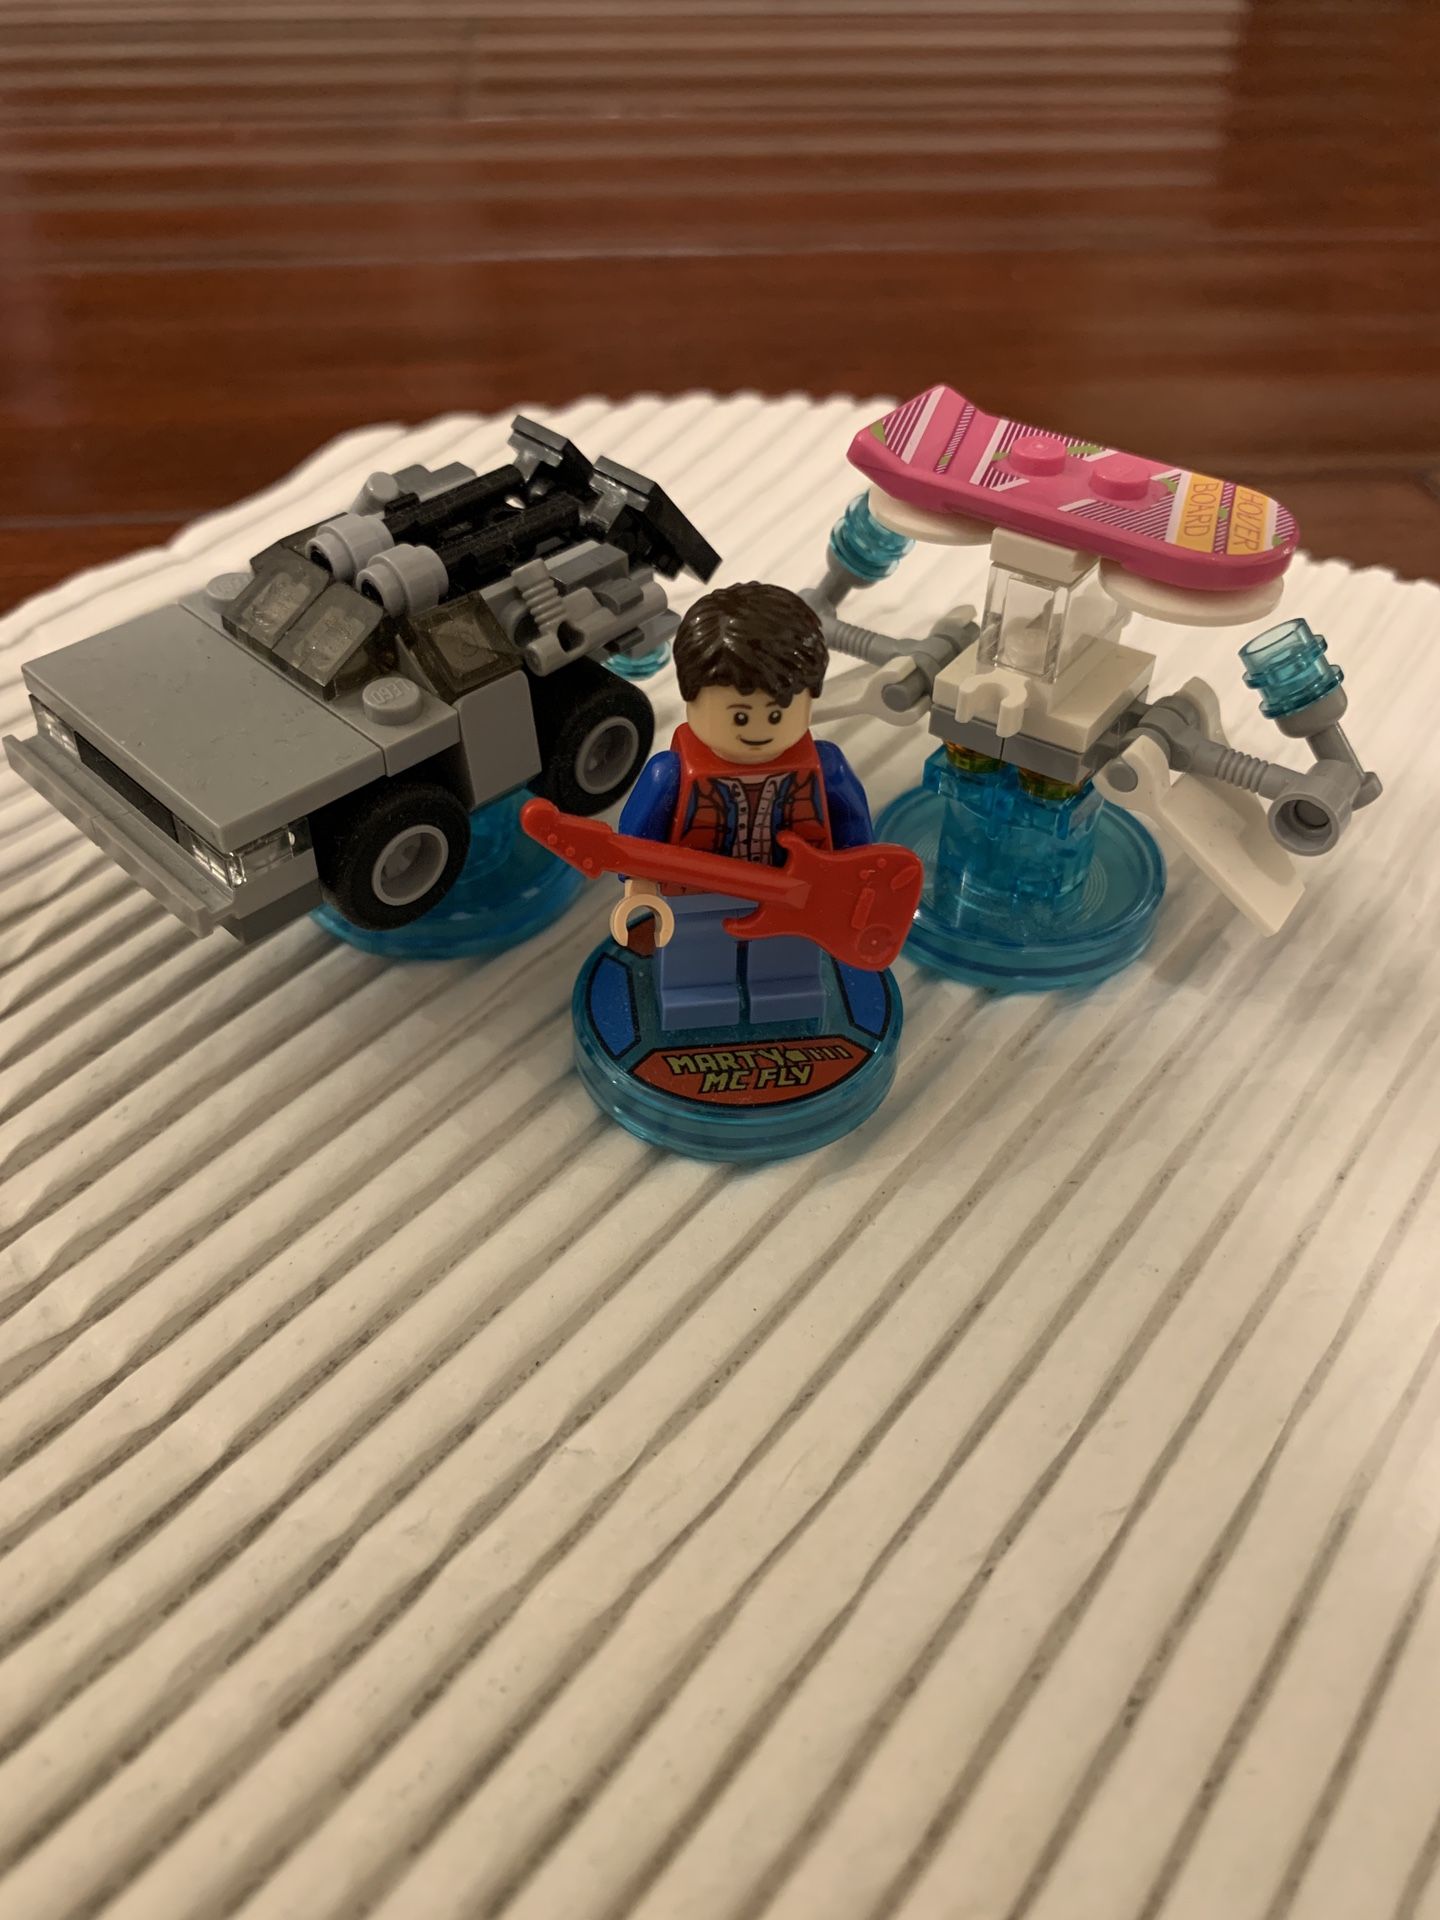 Back to the Future Level Pack - LEGO Dimensions 